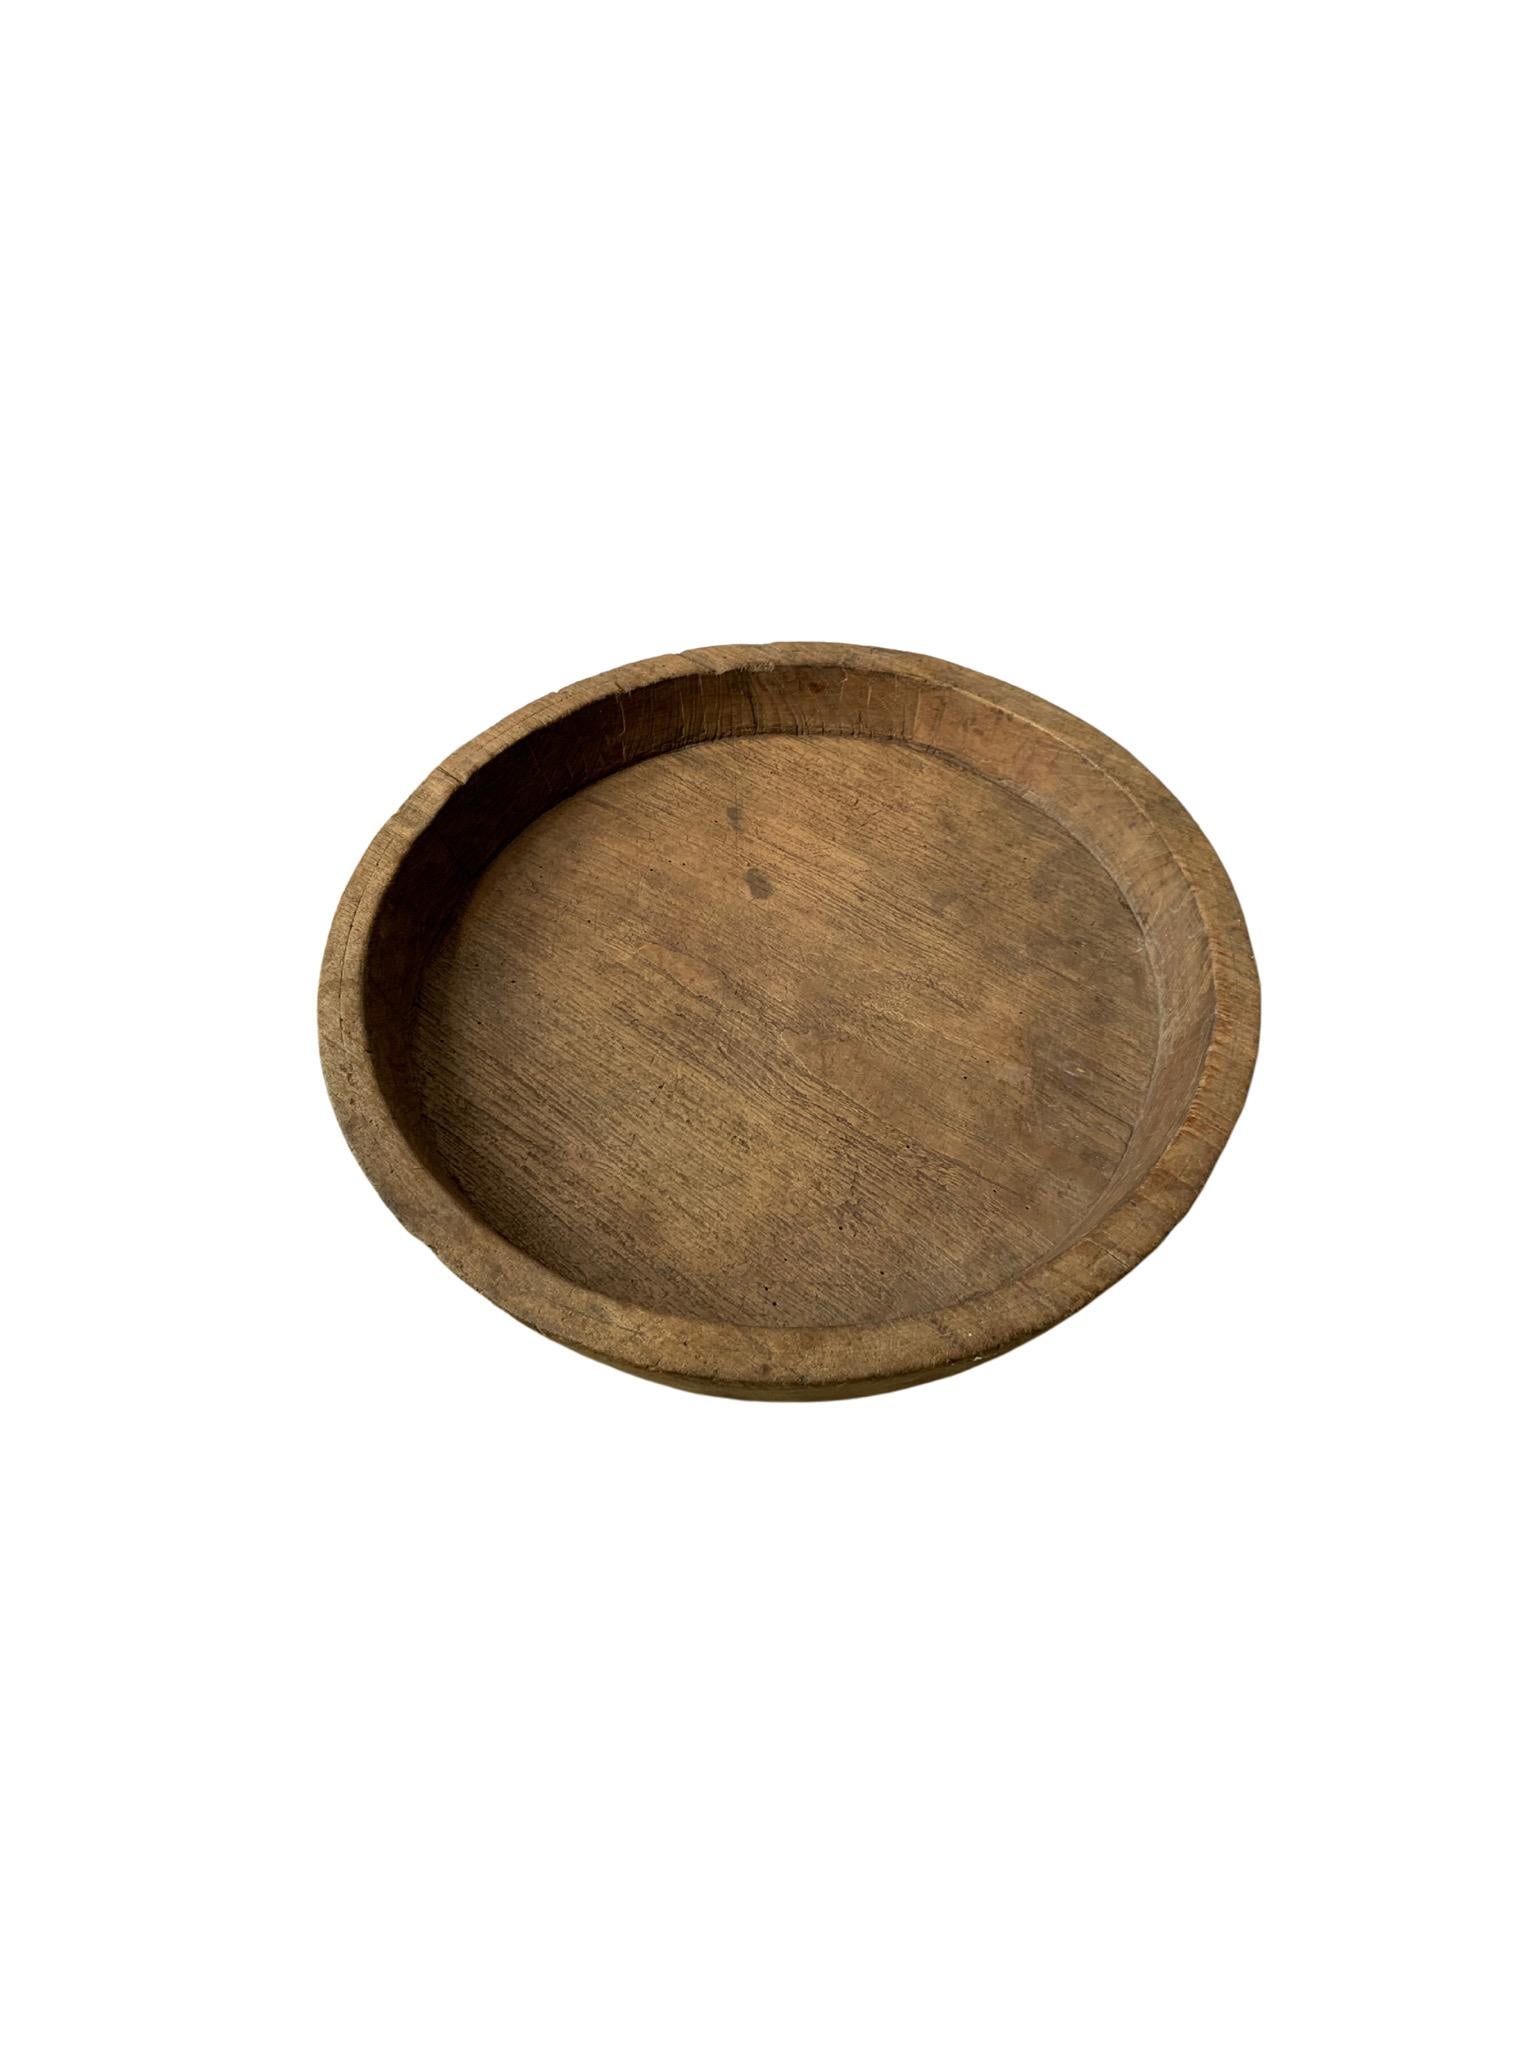 Other Vintage Teak Wood Bowl from Java, Indonesia For Sale